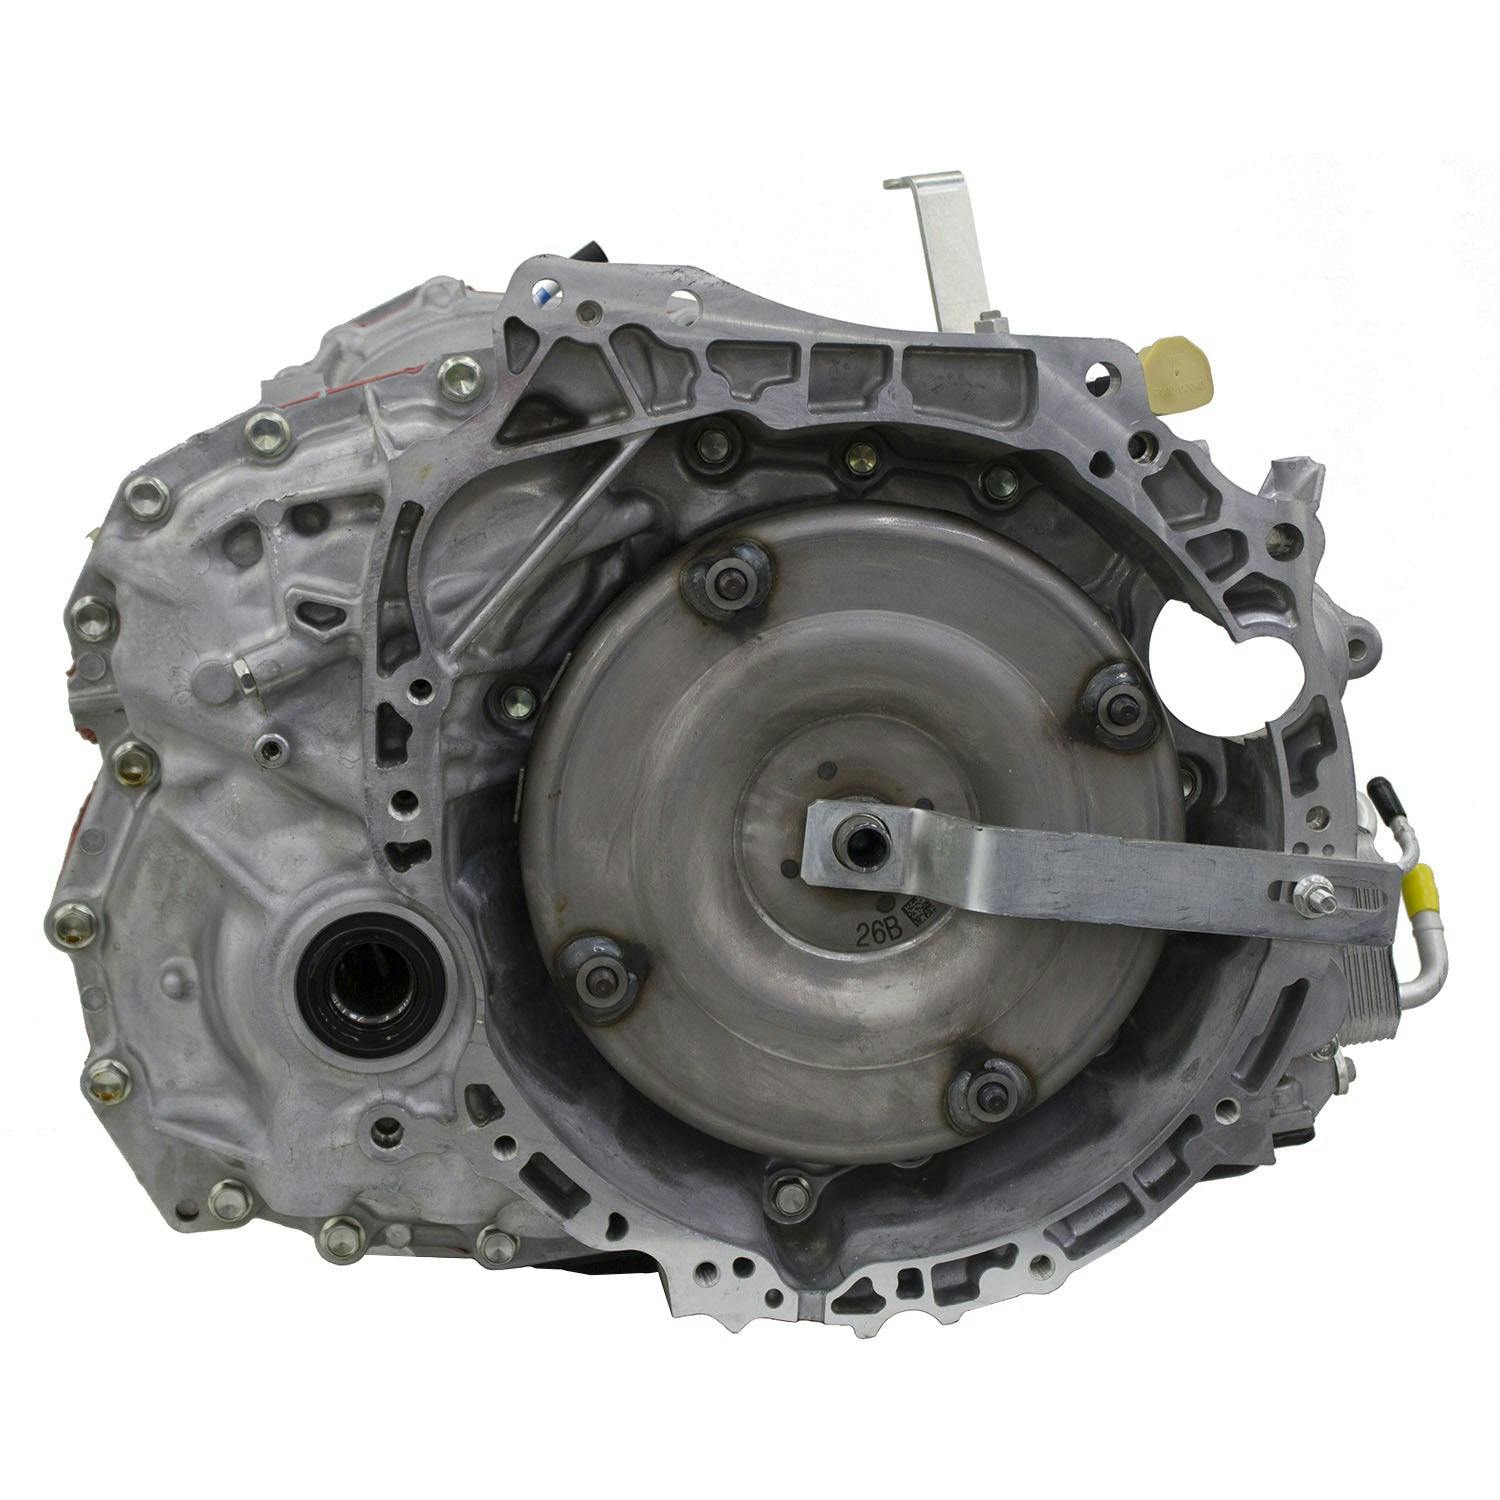 Automatic Transmission for 2009-2010 Nissan Rogue FWD with 2.5L Inline-4 Engine